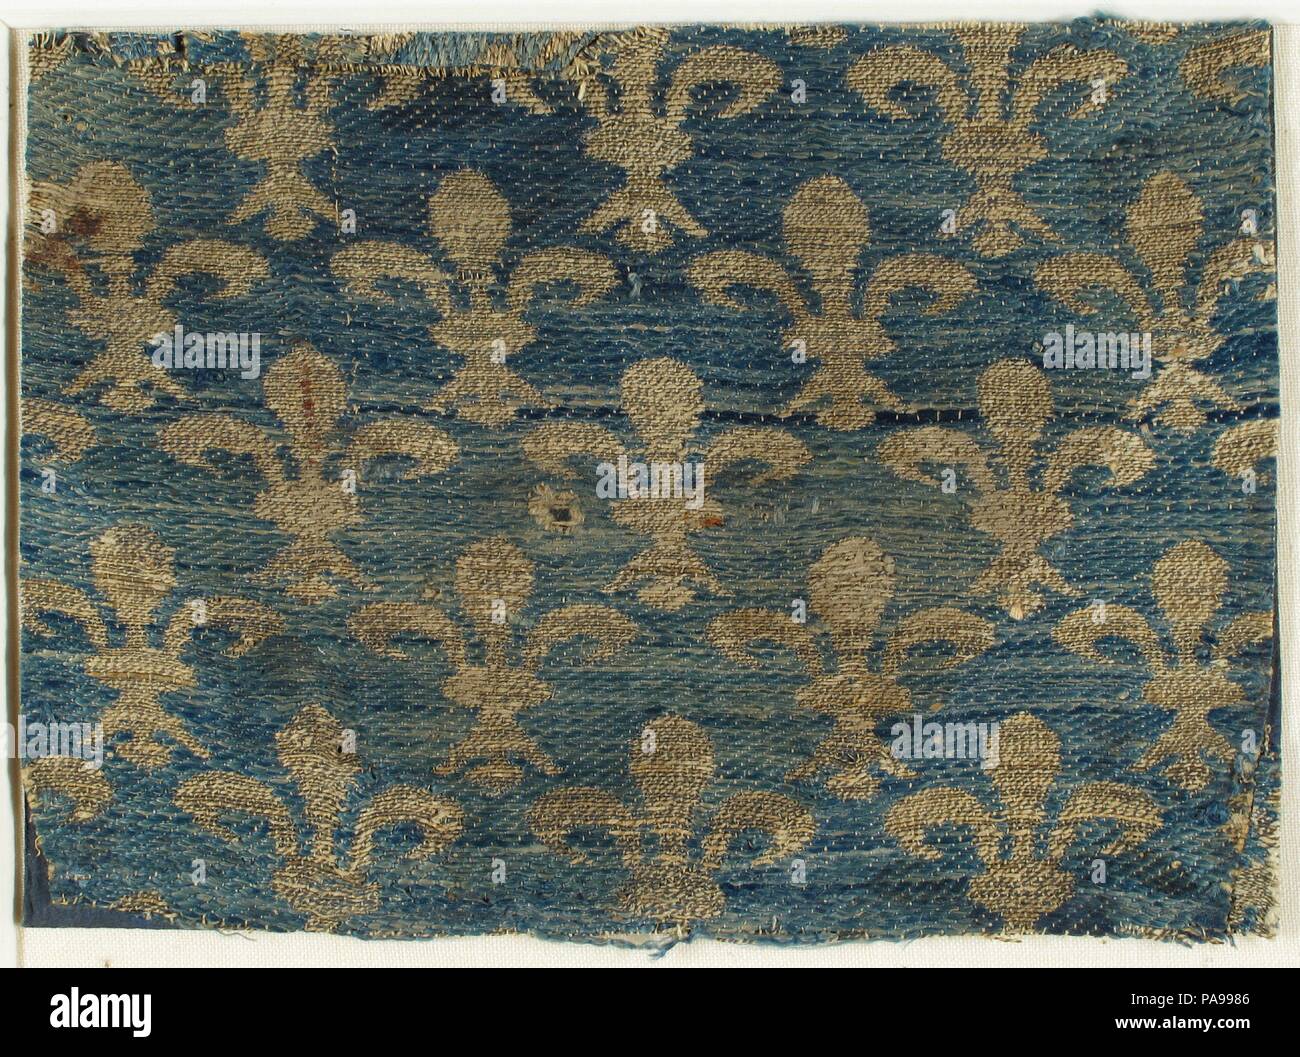 Textile with Fleur-De-Lis Motif. Culture: Italian. Dimensions: Overall: 3  1/8 × 4 1/8 in. (8 × 10.5 cm) Storage (Mat with 09.50.1022): 8 1/2 × 13 in.  (21.6 × 33 cm). Date: 13th century. Museum: Metropolitan Museum of Art, New  York, USA Stock Photo - Alamy